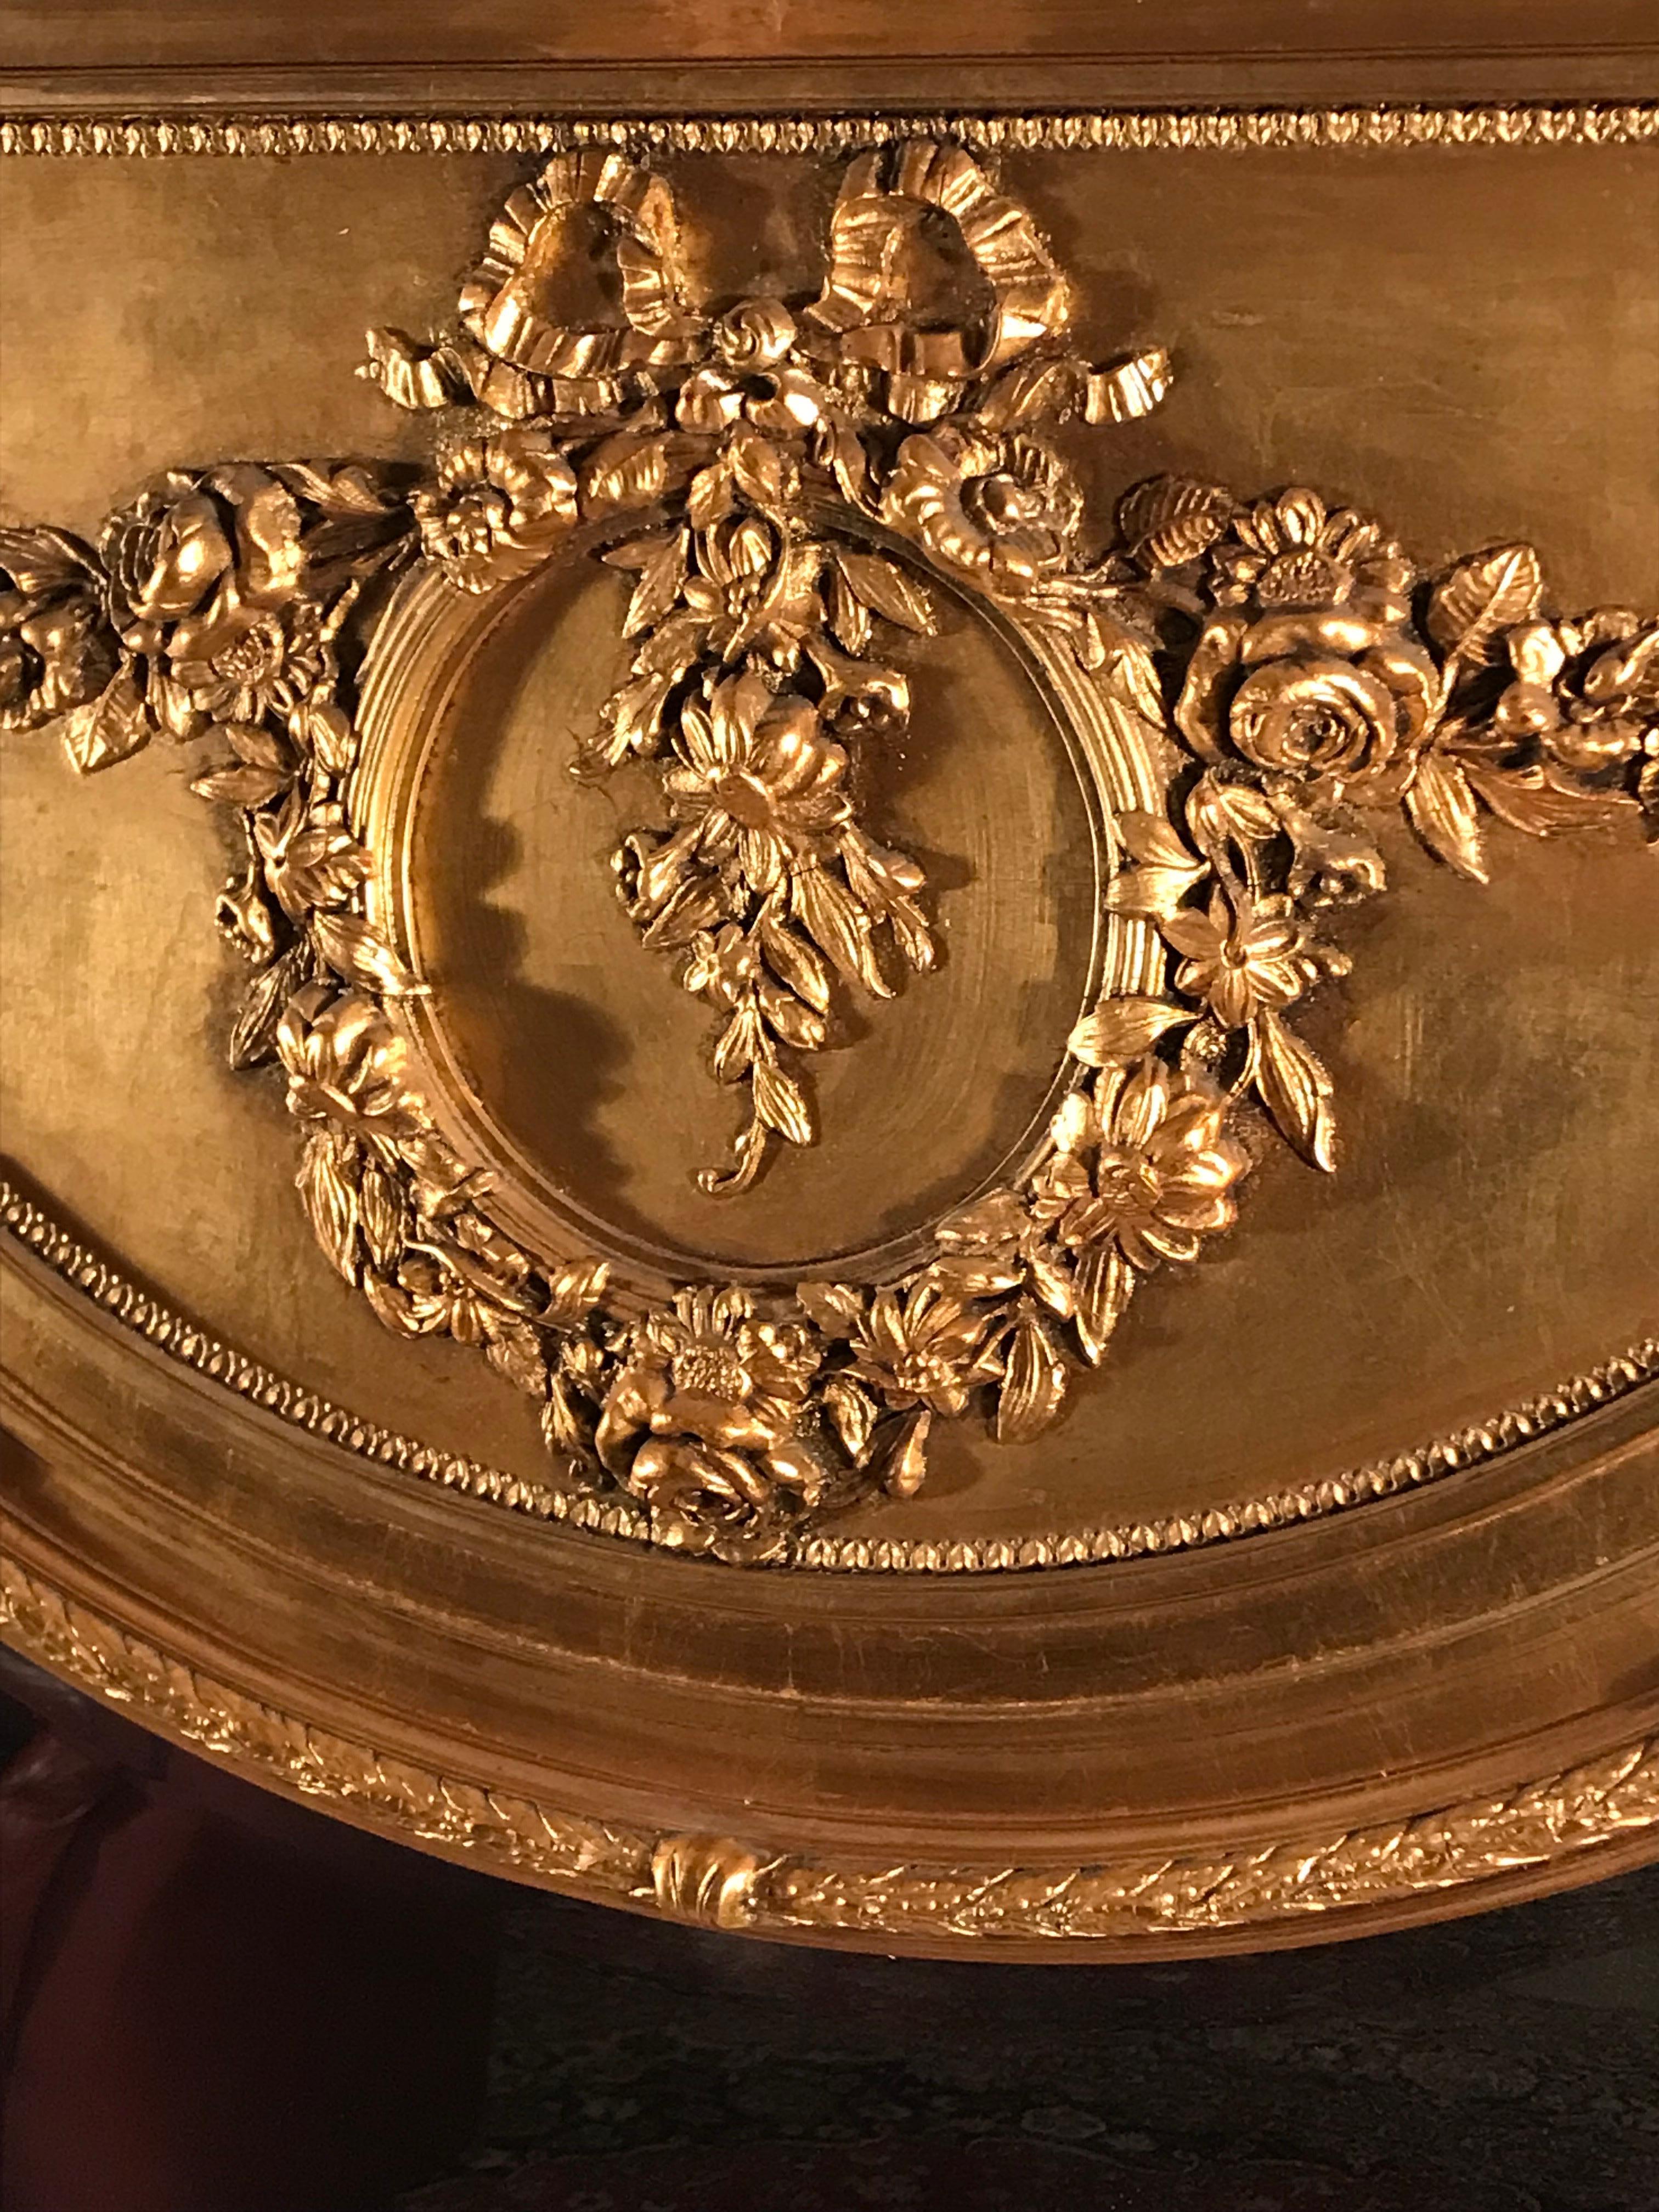 This impressive Louis XVI Style trumeau mirror stands out for its beautiful flower and leave decoration. The upper part has a gorgeous flower/roses garland with a central medallion. The gilt wood mirror is ion very good condition. The facet mirror